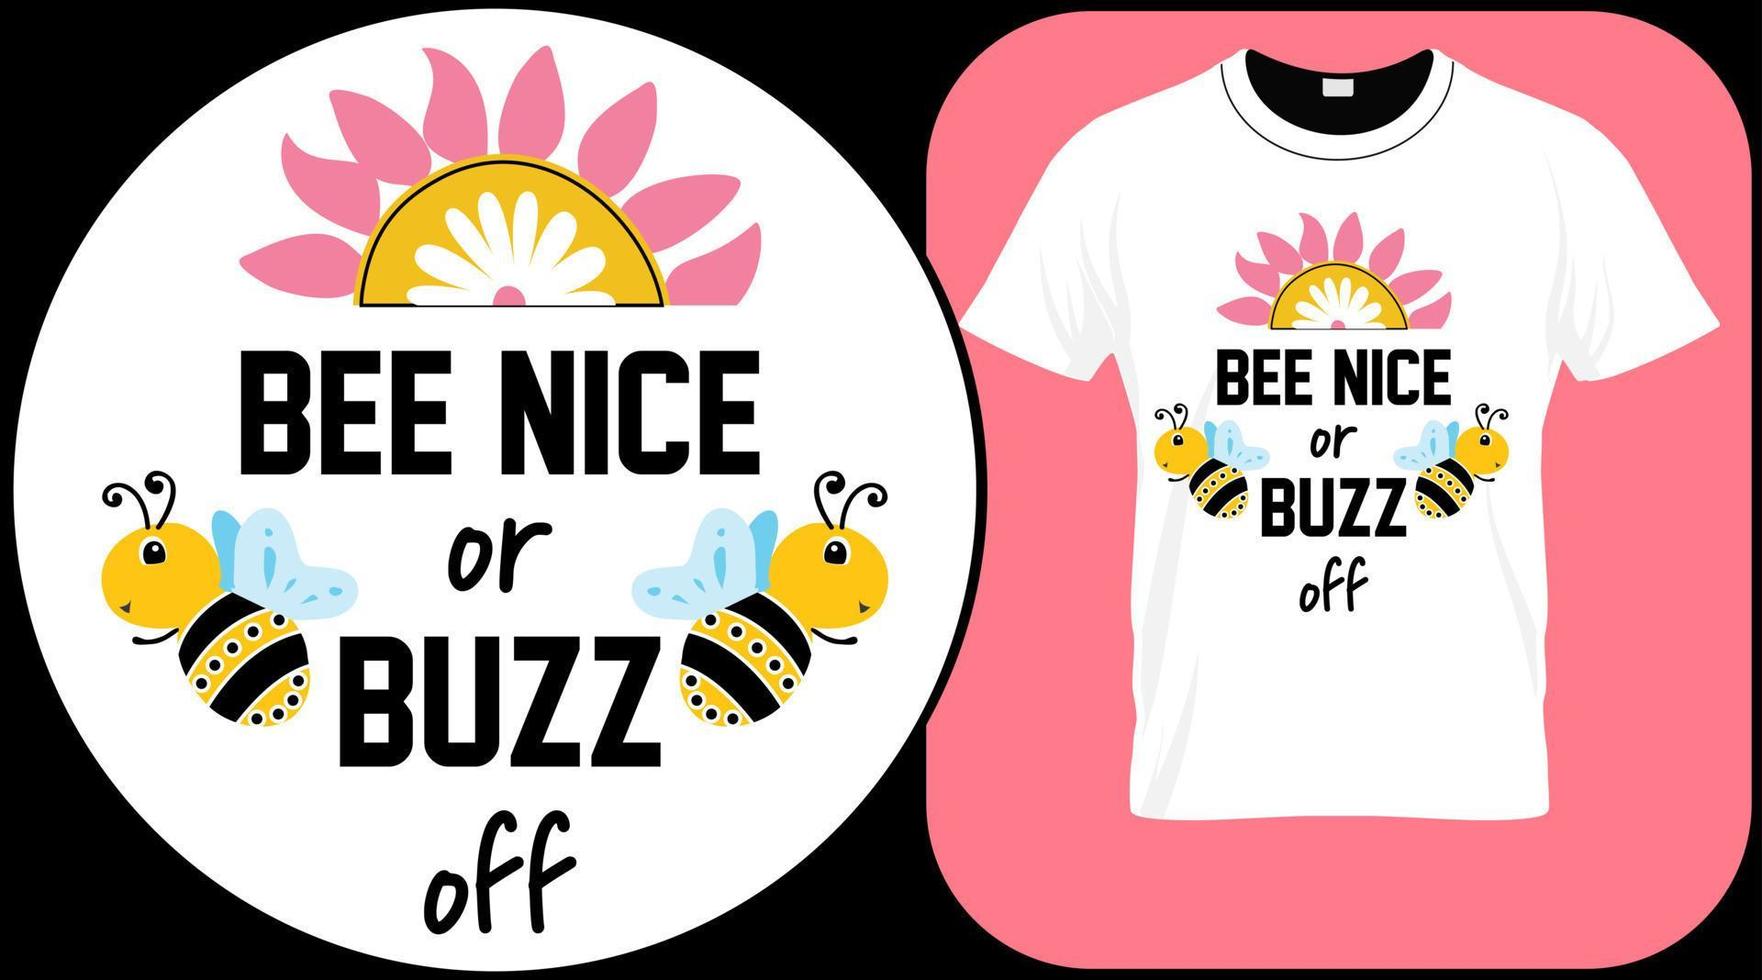 Bee nice or buzz, funny bee quote isolated on white background. Honey bee hand drawn lettering. Sweet honey love summer quote saying. Typography vector print illustration for t shirt, poster.